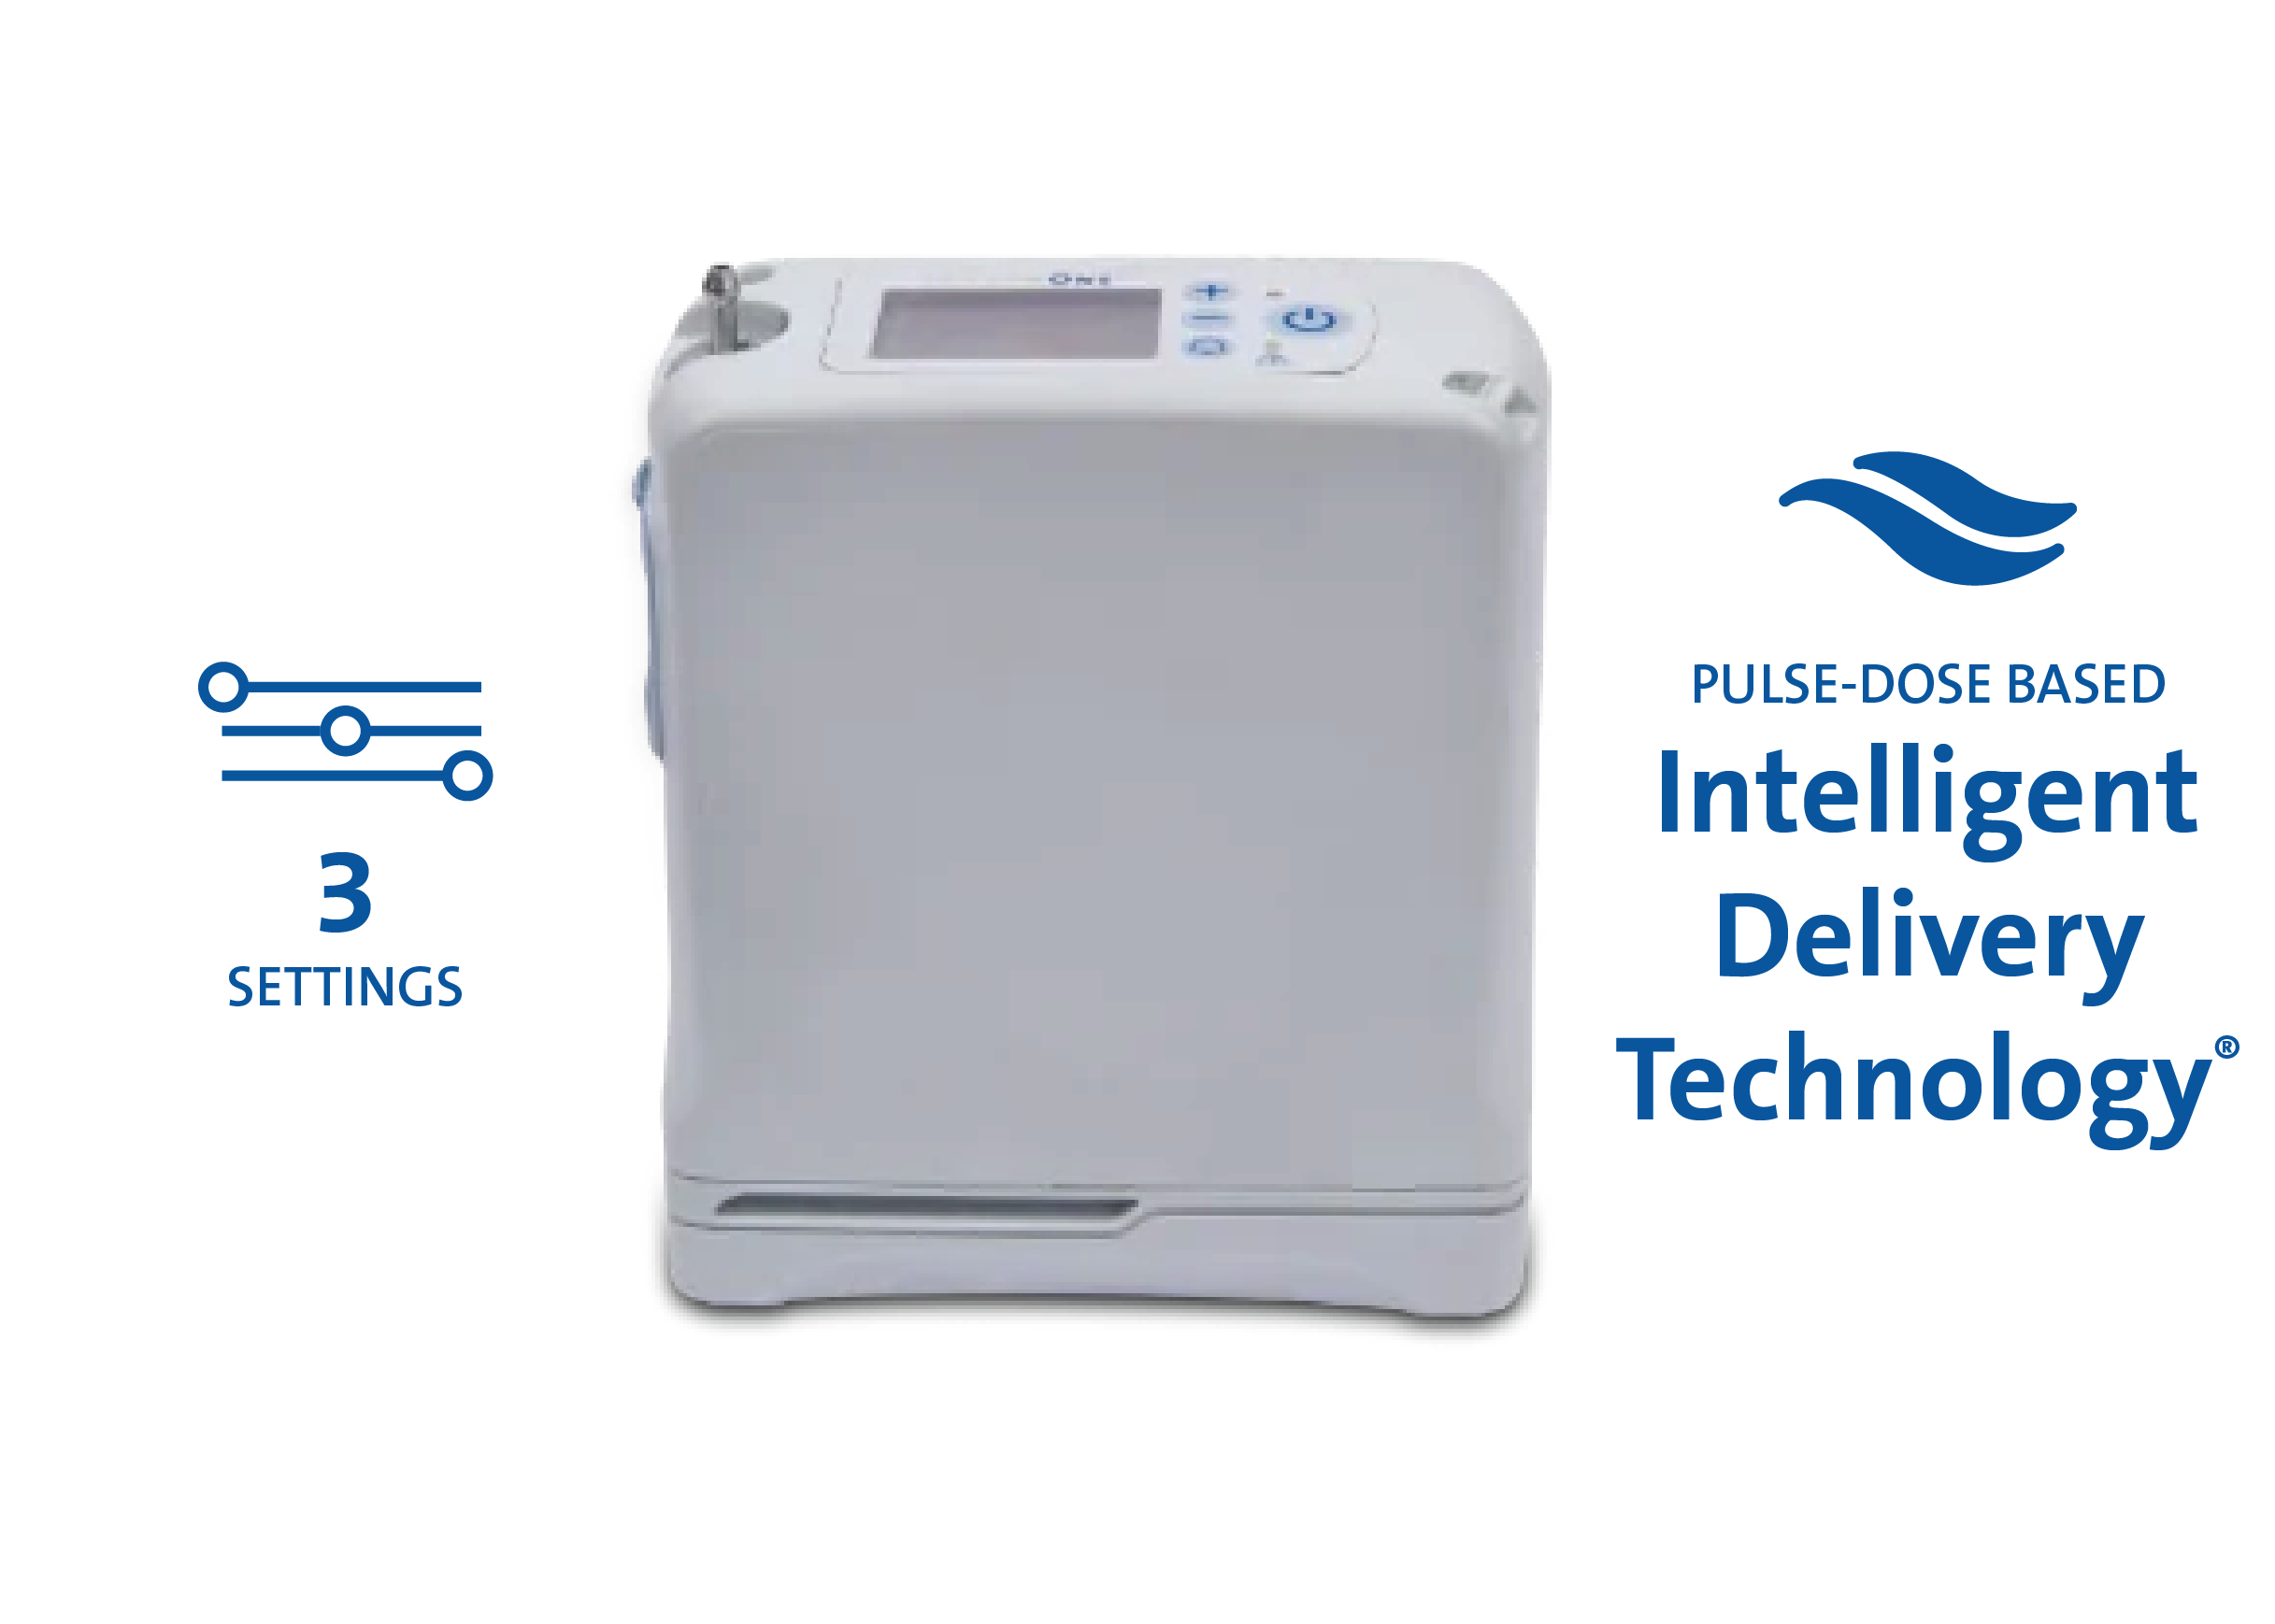 Inogen One G4. Customer-replaceable sieve beds and filters. Delivers real-time stats, such as battery life and settings, to an app on your mobile device. Carry bag included.